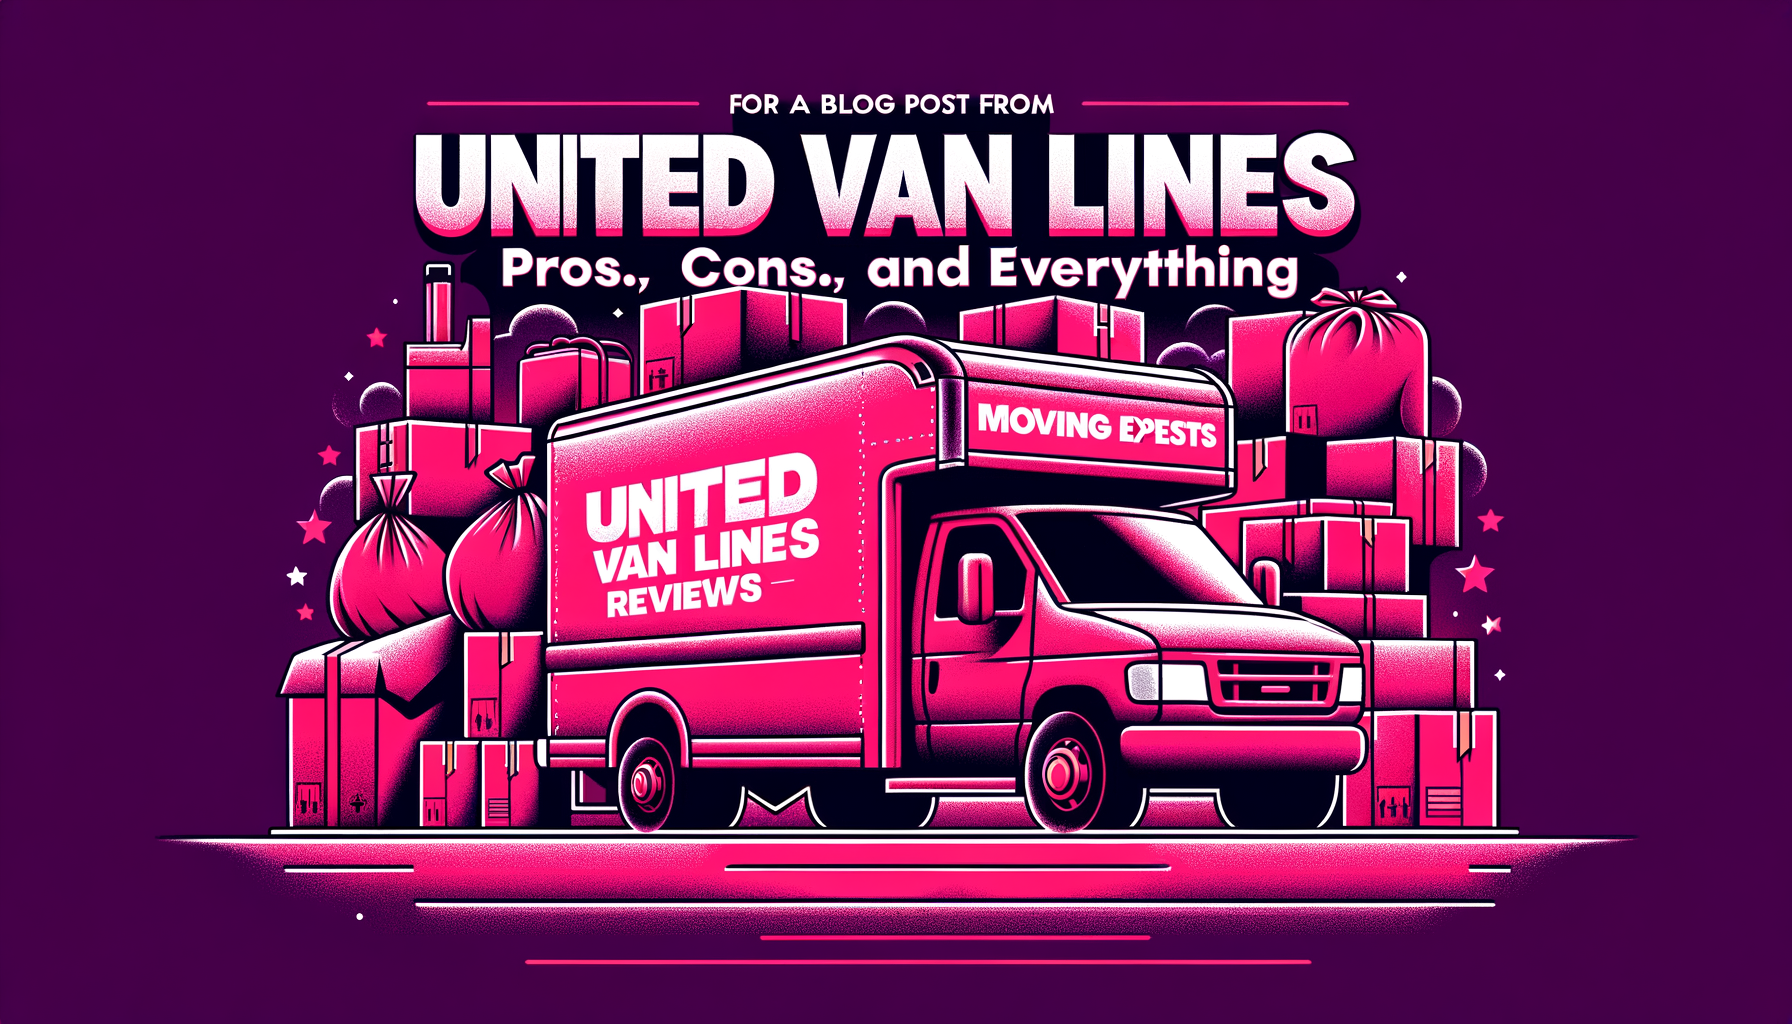 Cartoon illustration of a fuschia moving truck with happy and sad emoticons balancing on top, depicting the pros and cons of United Van Lines services.